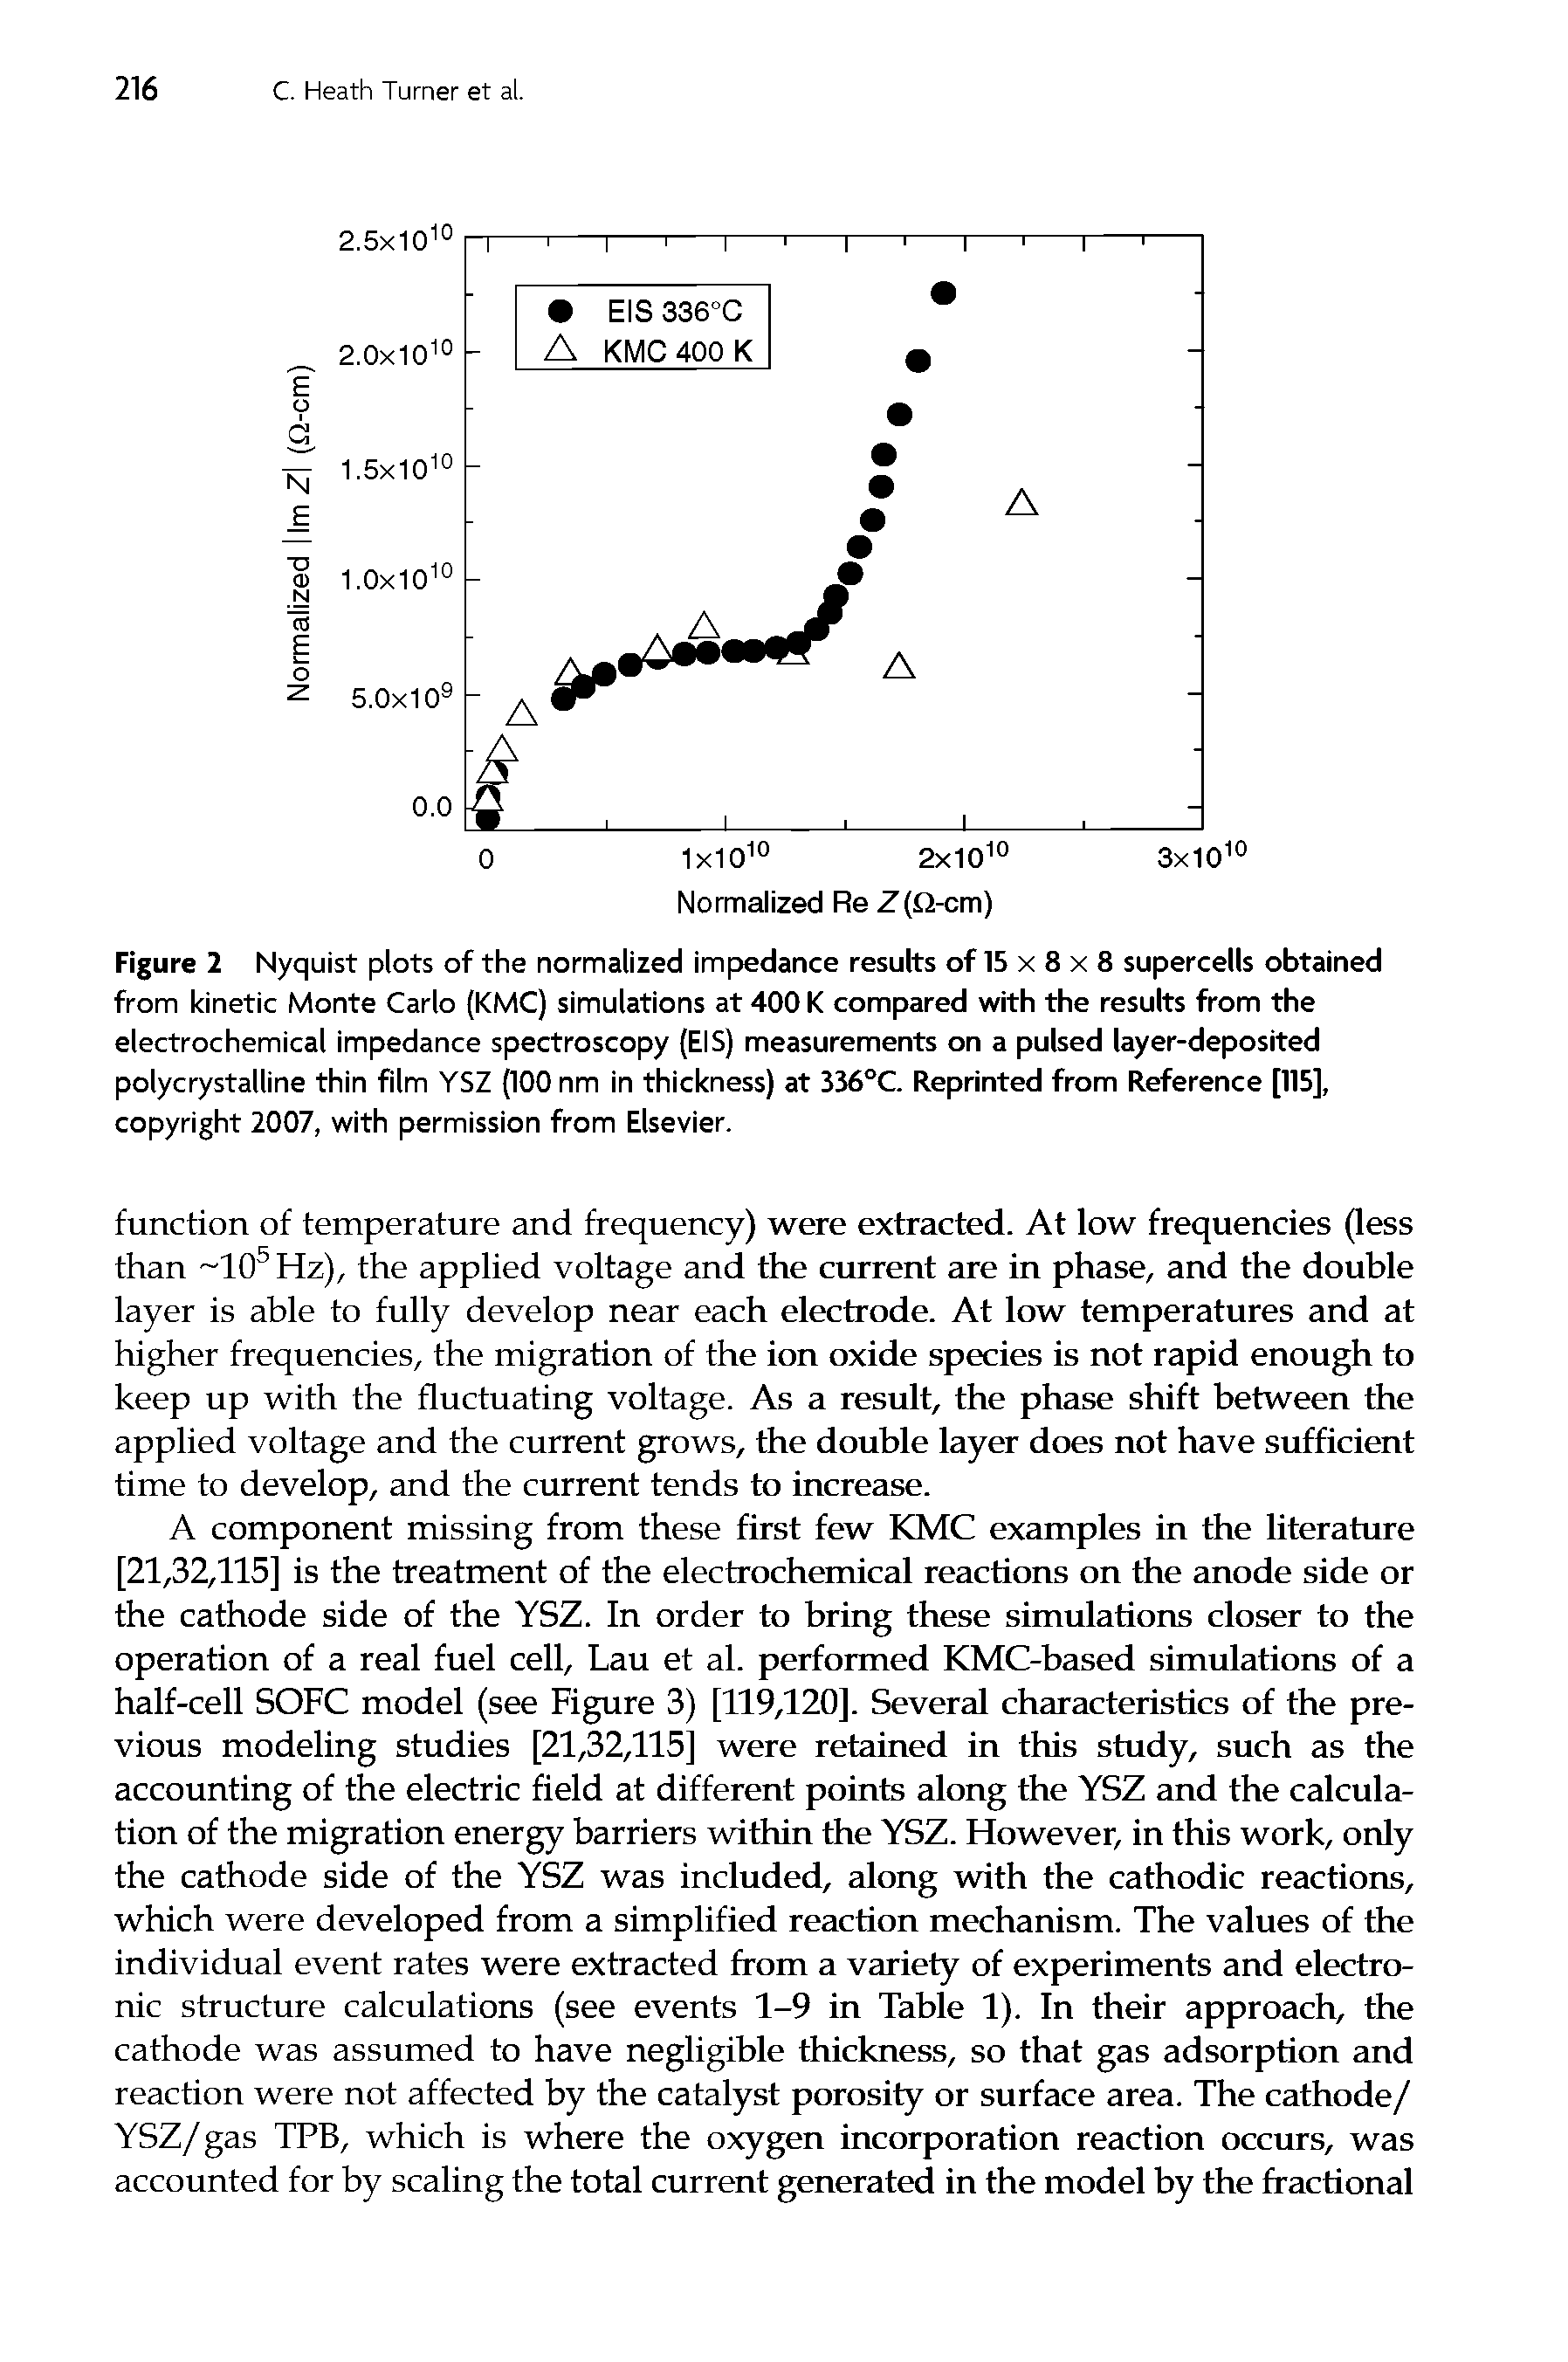 Figure 2 Nyquist plots of the normalized impedance results of 15 x 8 x 8 supercells obtained from kinetic Monte Carlo (KMC) simulations at 400 K compared with the results from the electrochemical impedance spectroscopy (EIS) measurements on a pulsed layer-deposited polycrystalline thin film YSZ (100 nm in thickness) at 336°C. Reprinted from Reference [115], copyright 2007, with permission from Elsevier.